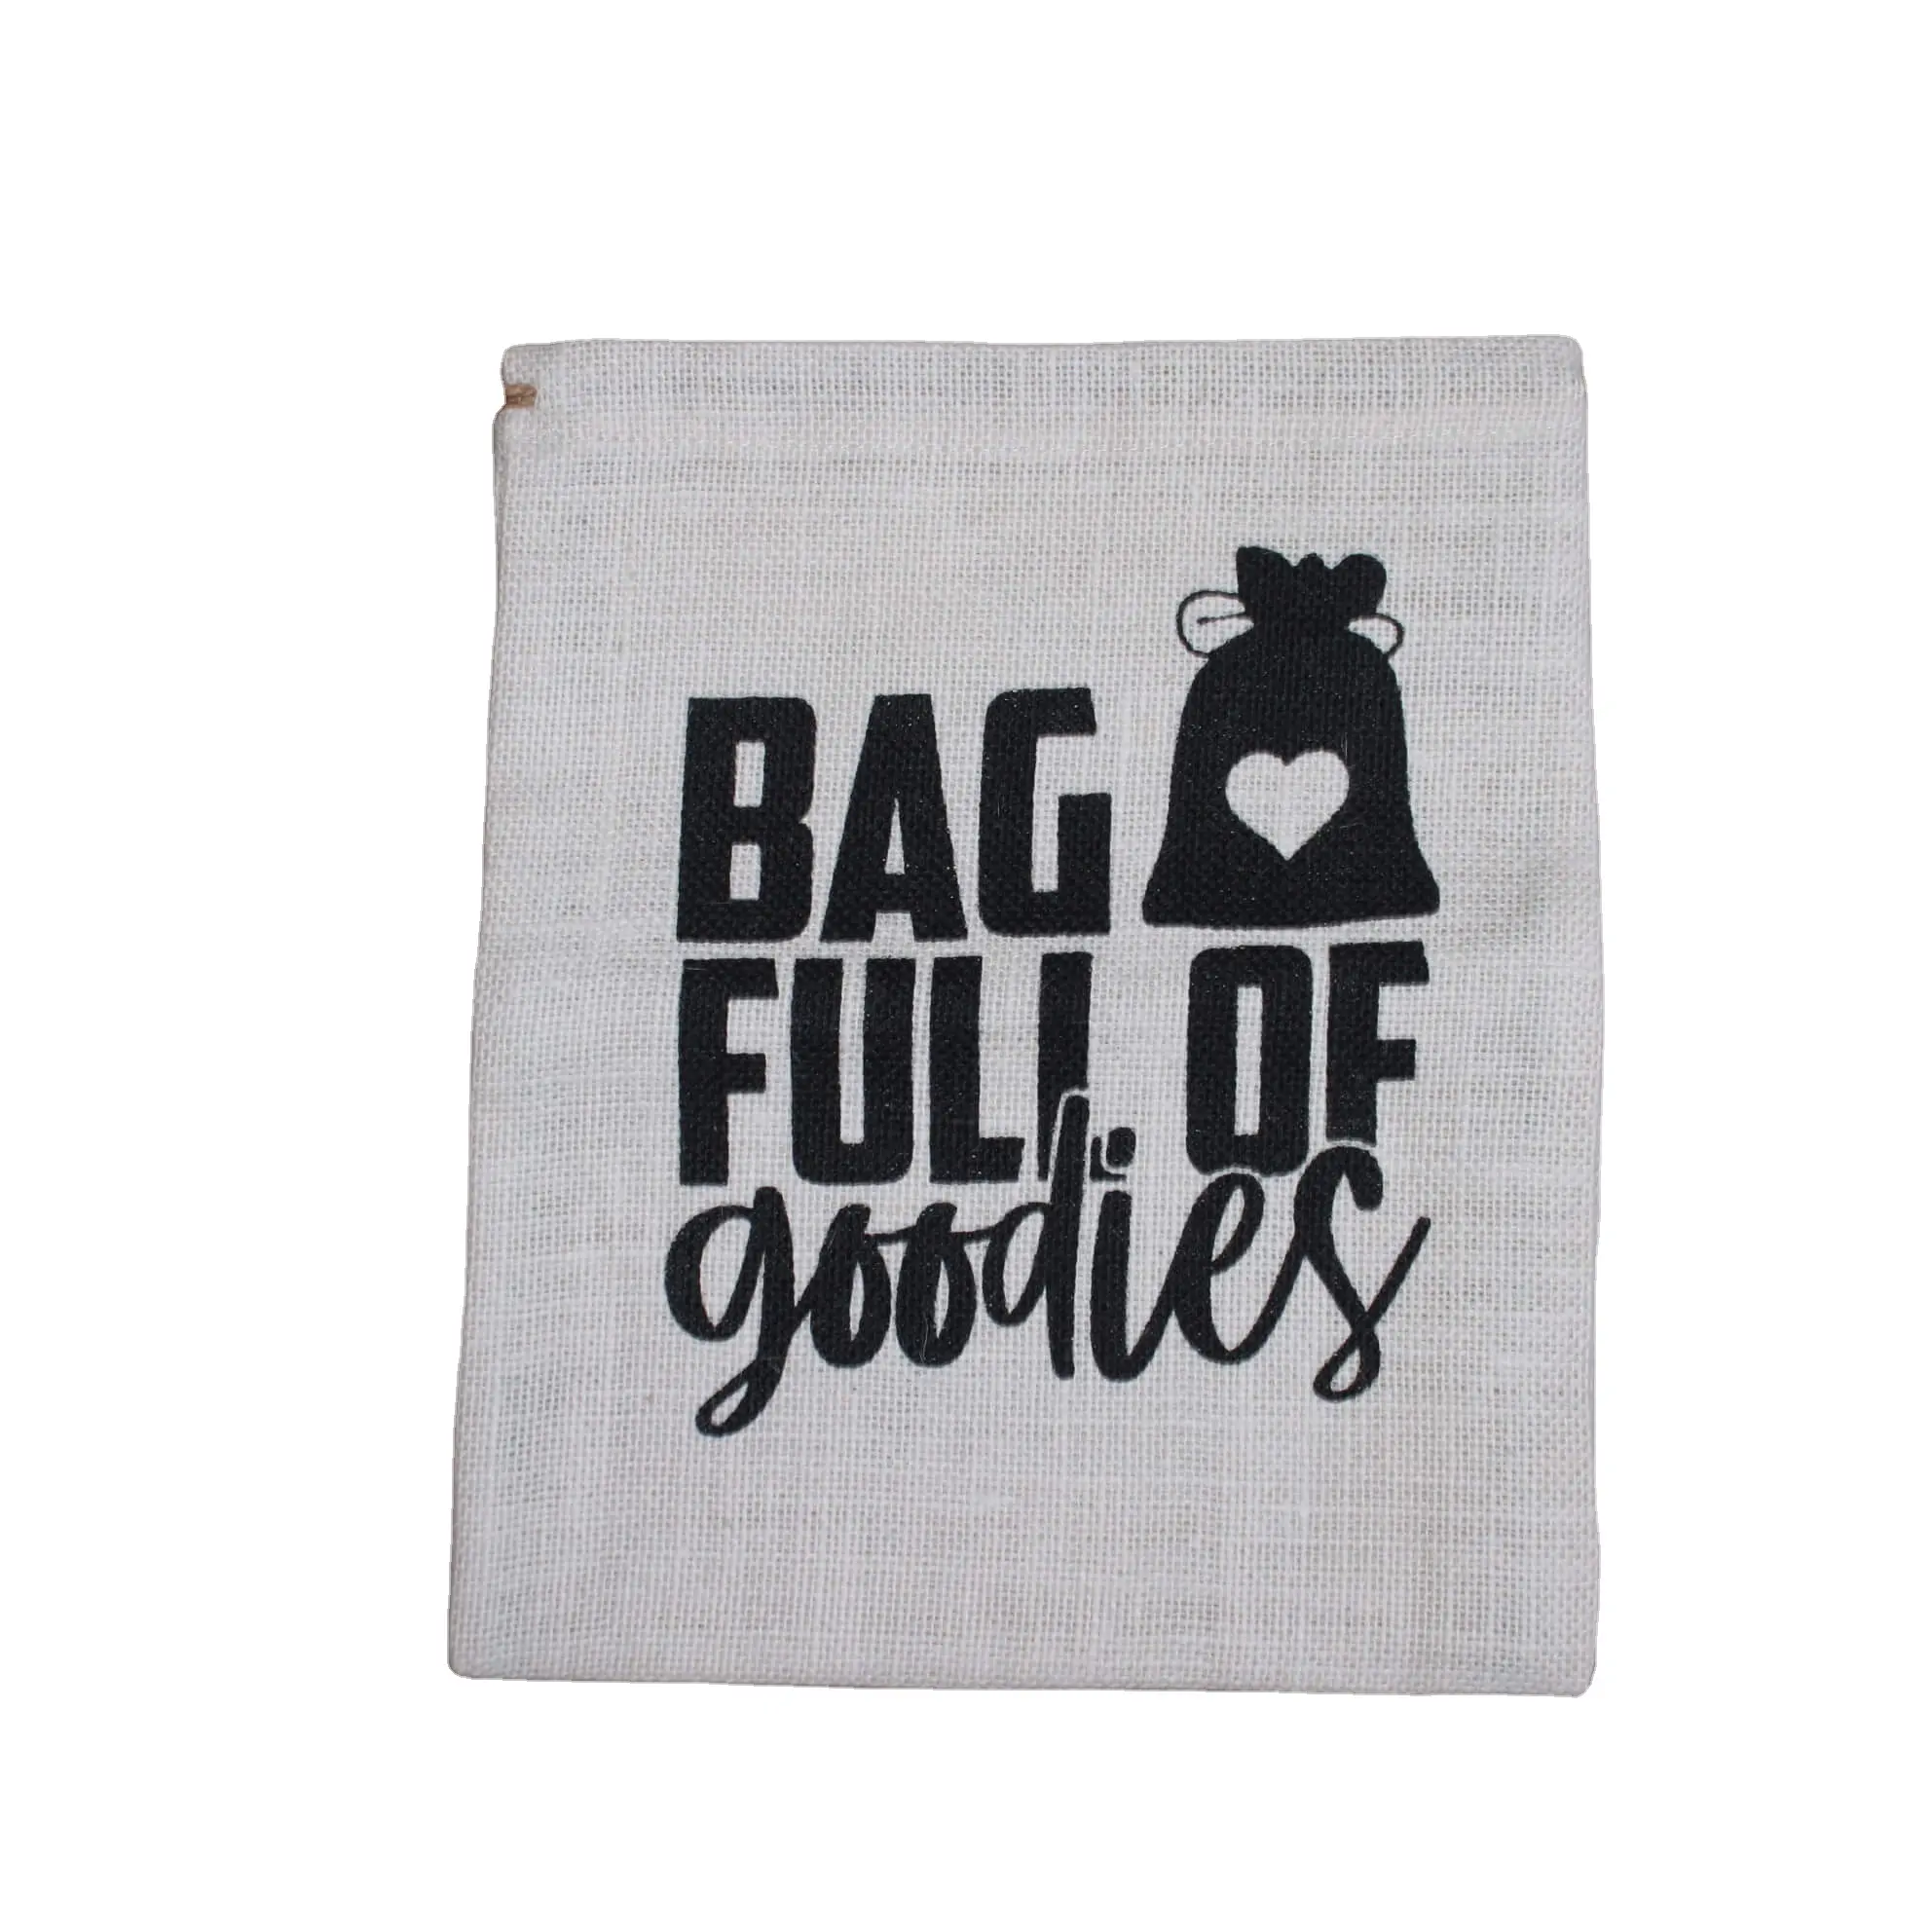 These bags will bring luck and good health because they are made with lots of love